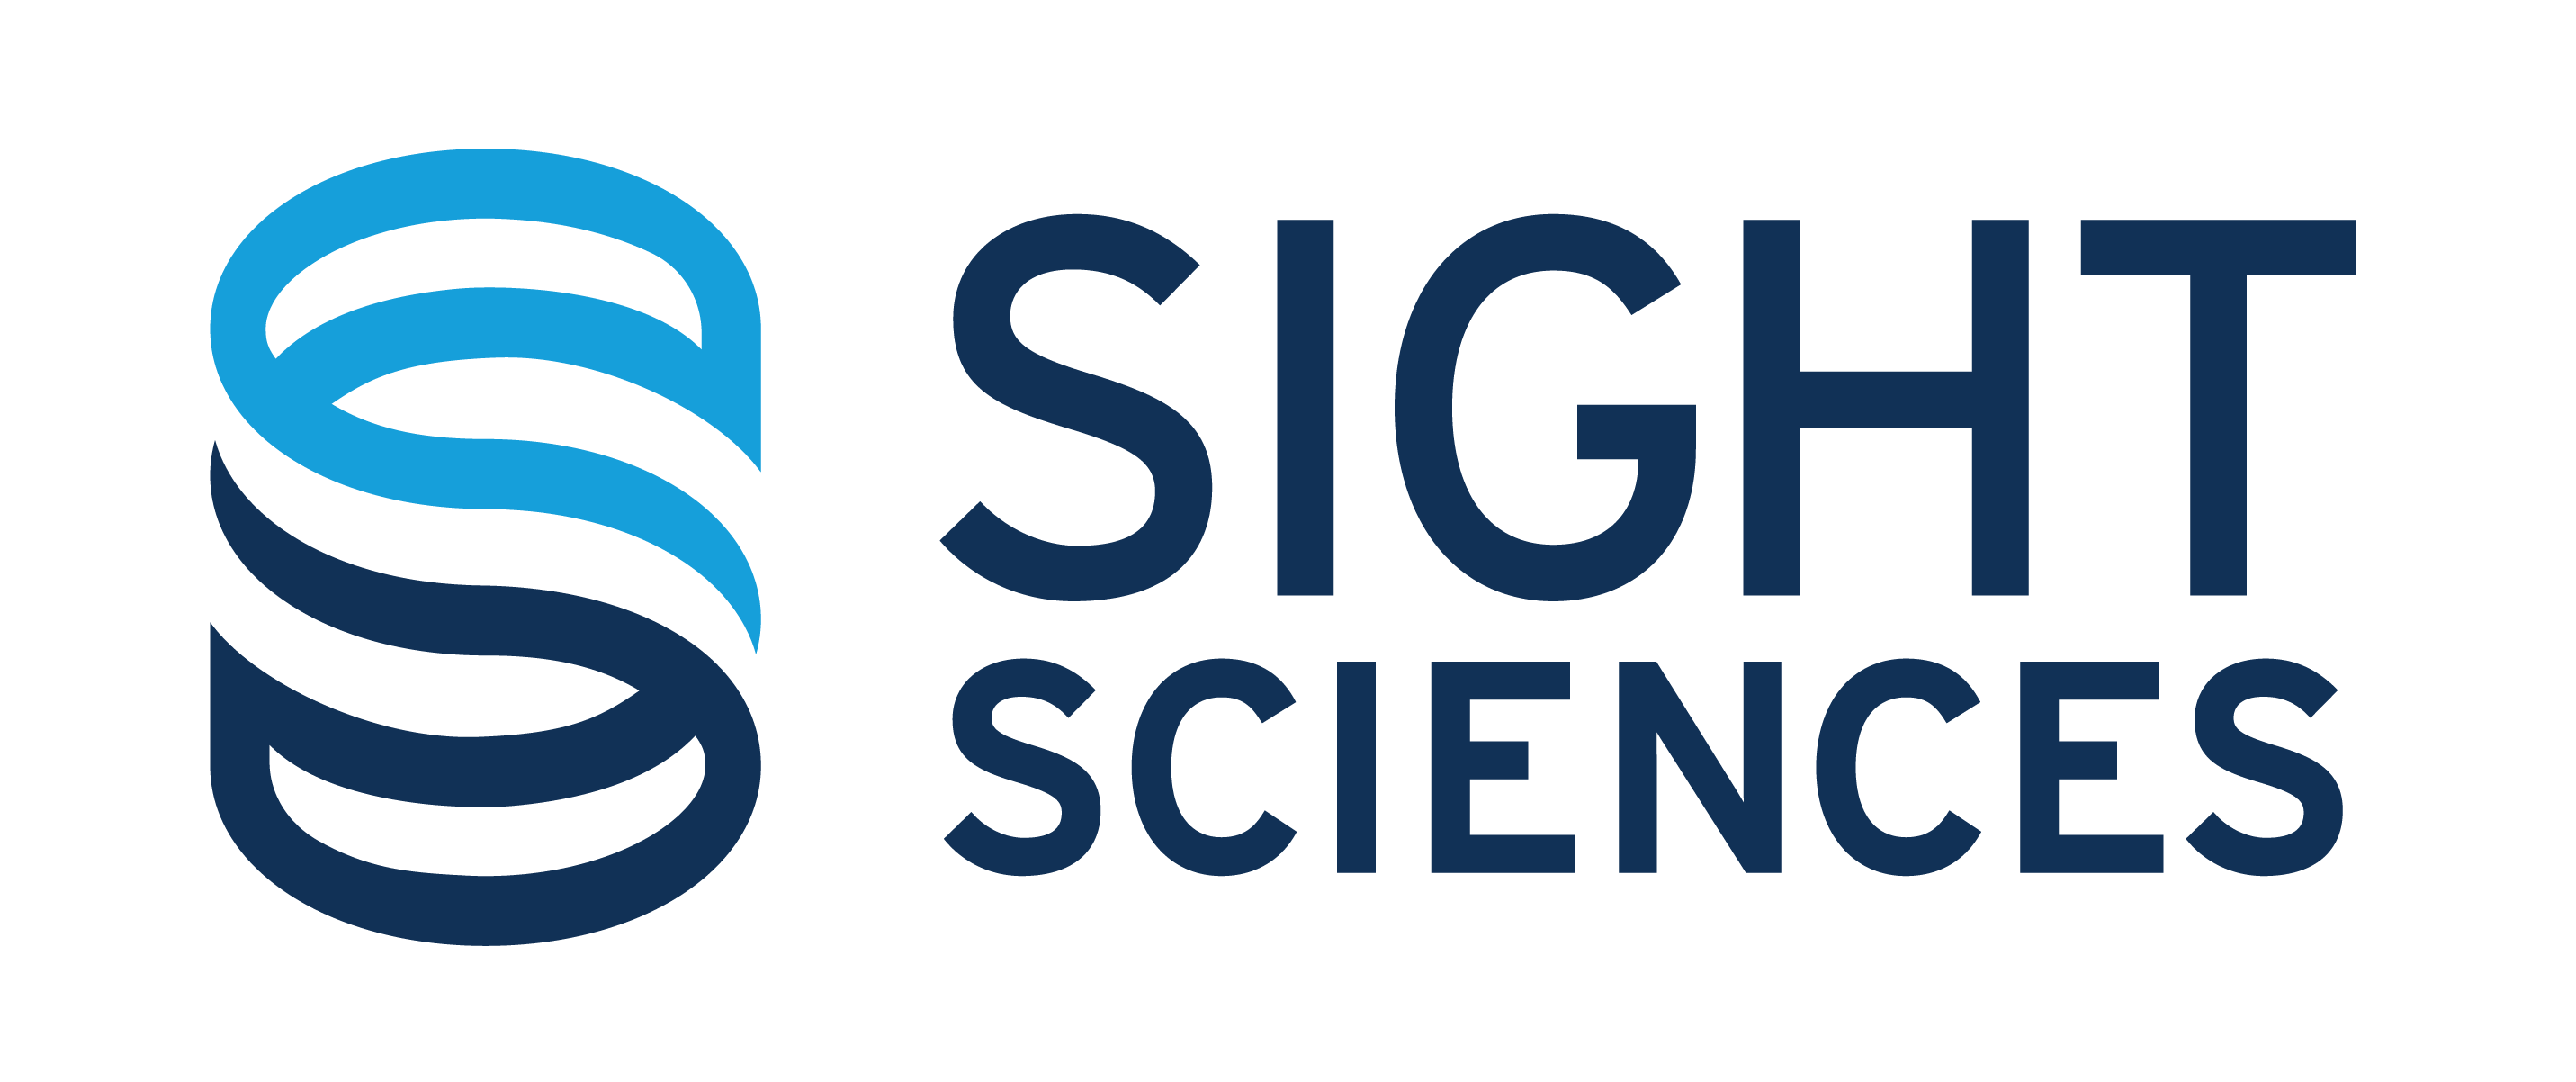 Sight Sciences Announces Positive Results and Primary Endpoint Successfully Met in SAHARA, a Randomized Controlled Clinical Trial Comparing Interventional Eyelid Procedures Enabled by TearCare® Technology to Restasis¹ for the Treatment of Dry Eye